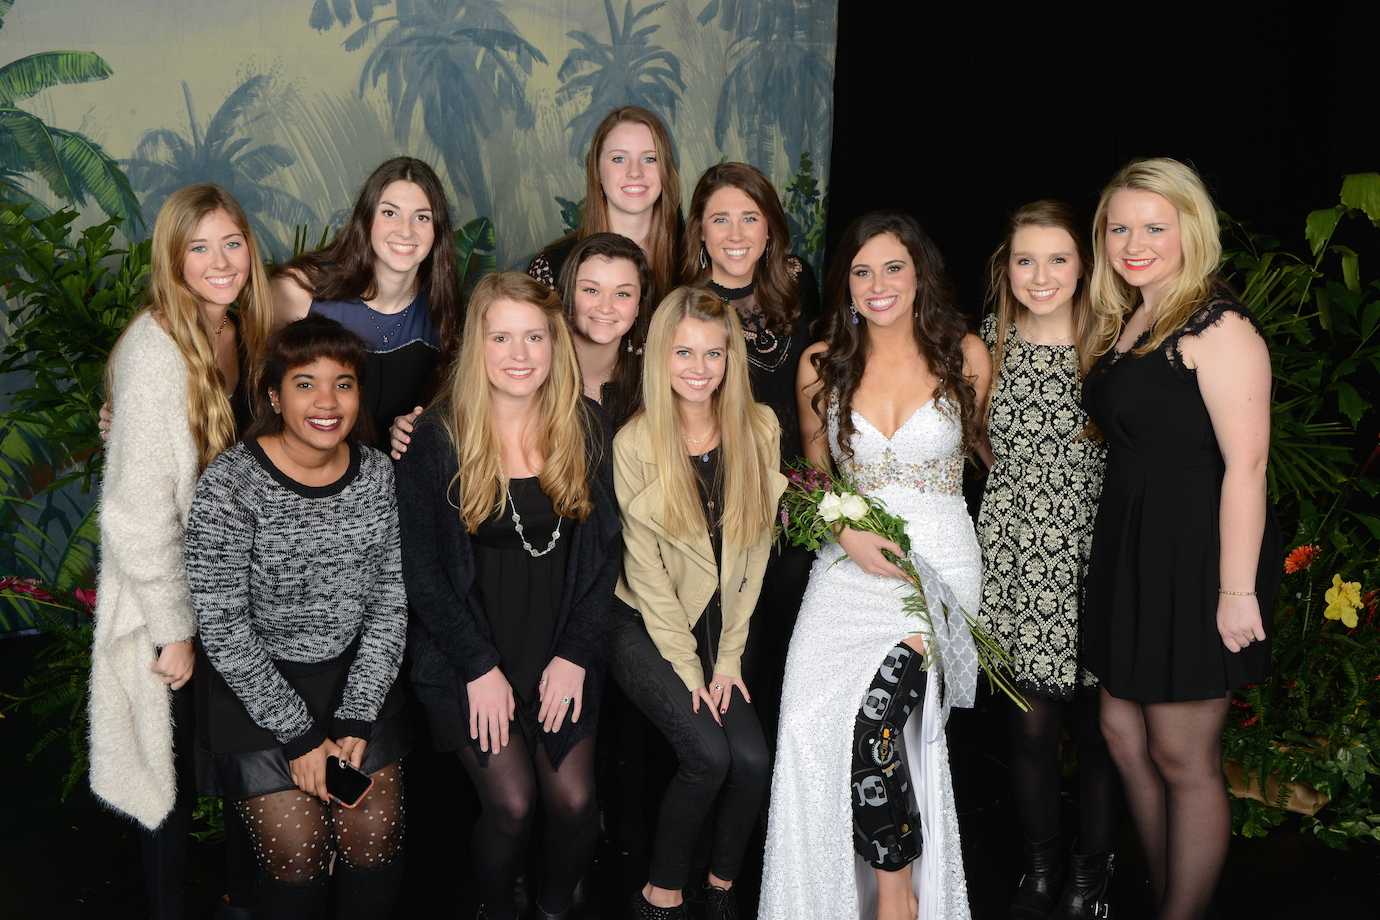 (photo courtesy of Mr. Hubert Worley) The Précis Staff pose after the pageant